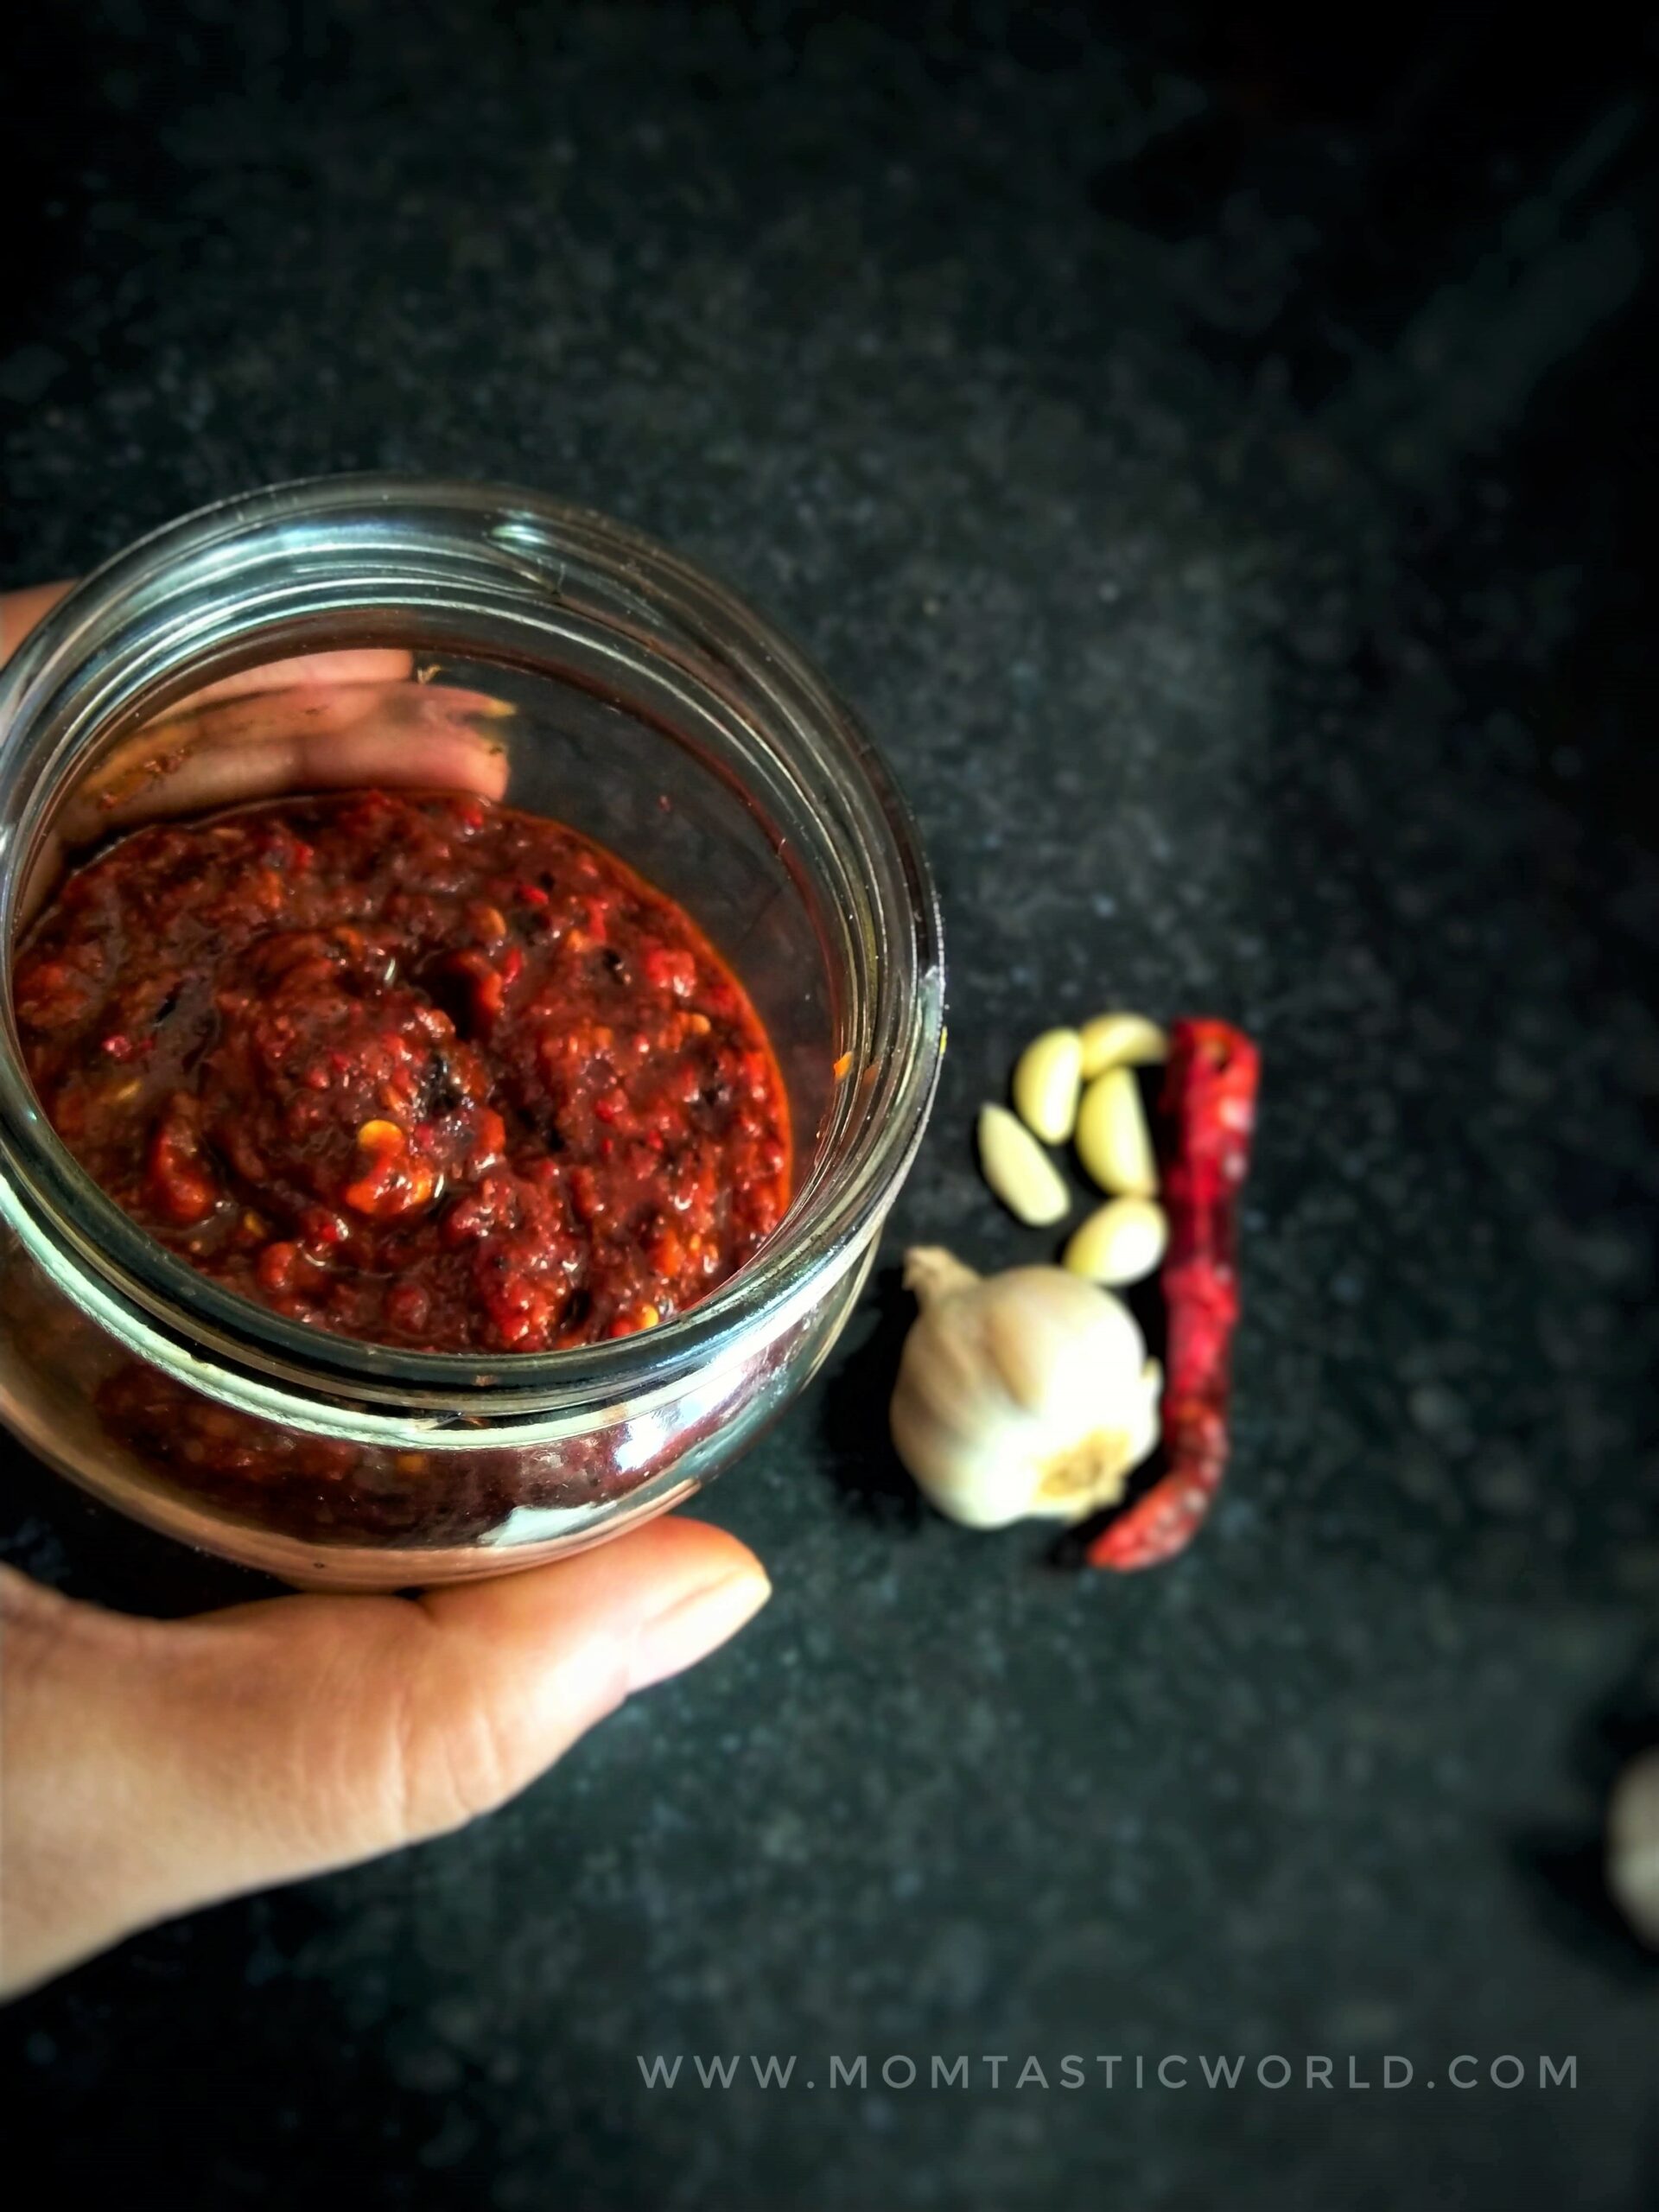 How To Make Easy And Tasty Garlic Chutney #Recipe in 15 minutes